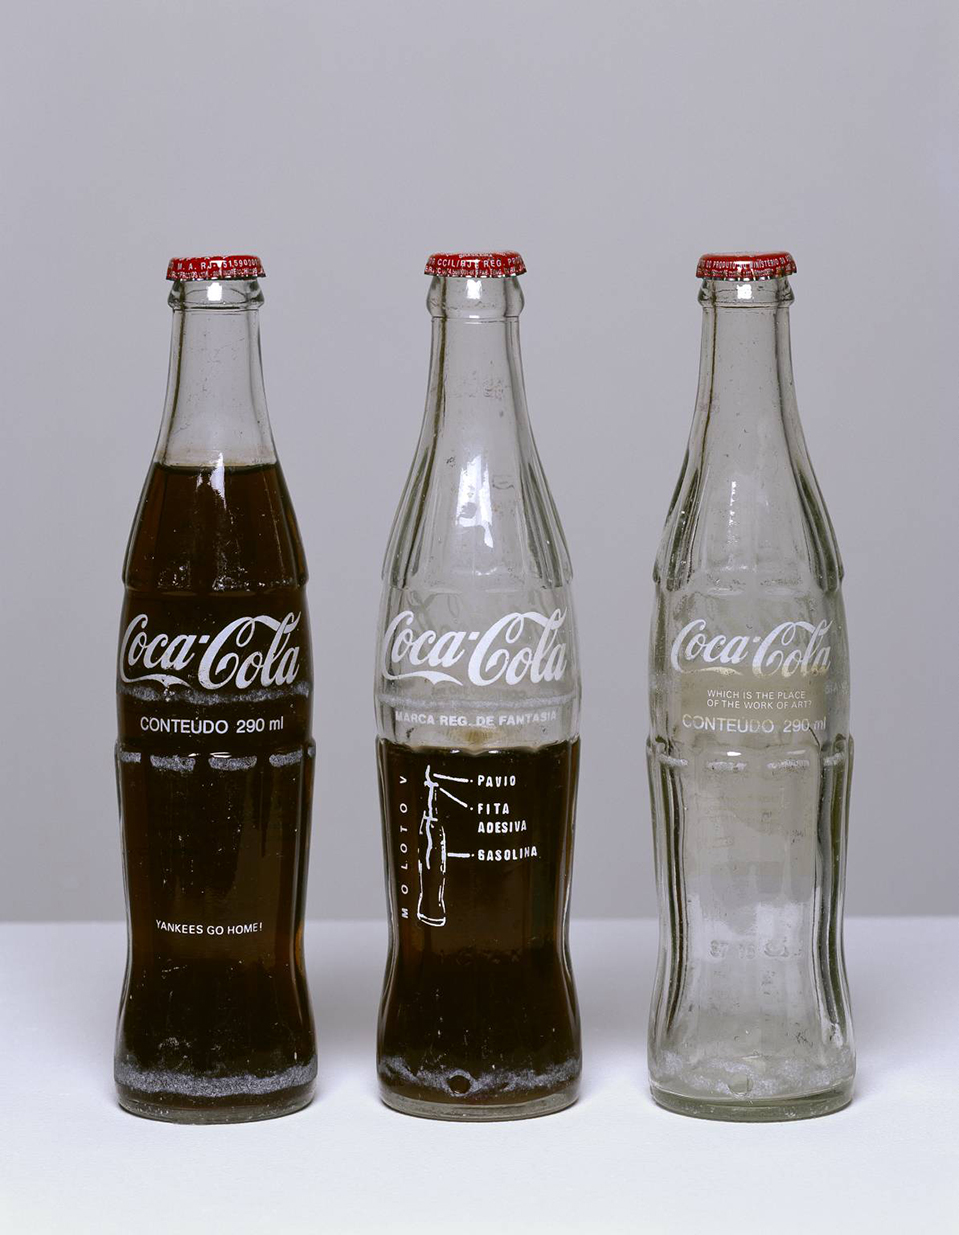 Insertions into Ideological Circuits: Coca-Cola Project 1970 by Cildo Meireles born 1948